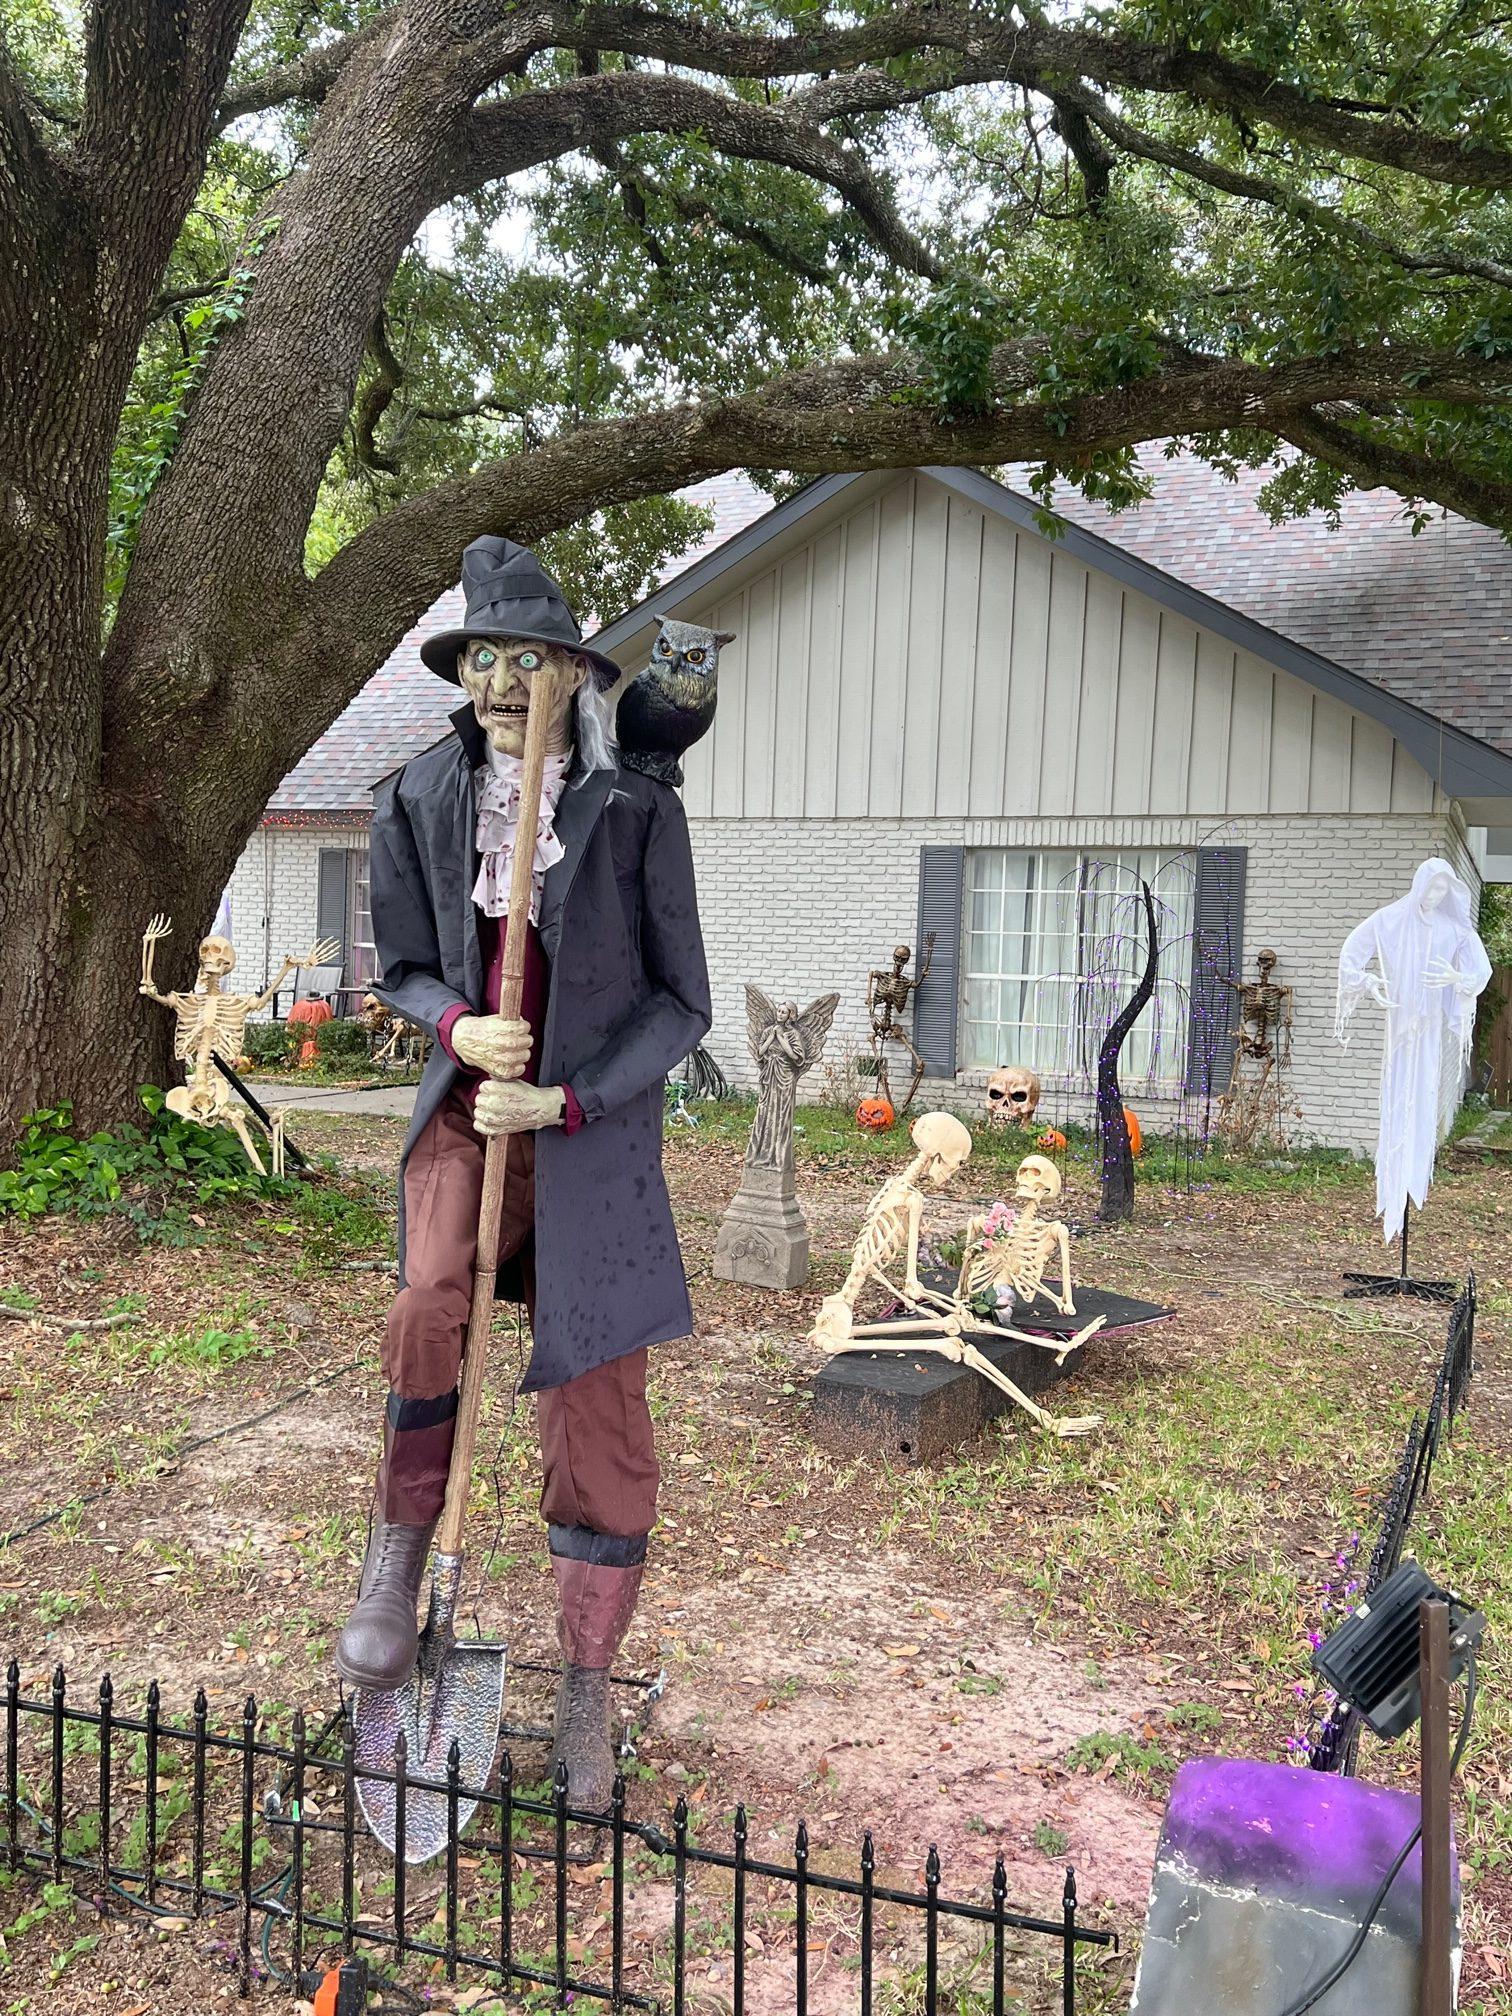 Where to see halloween decorations in lafayette